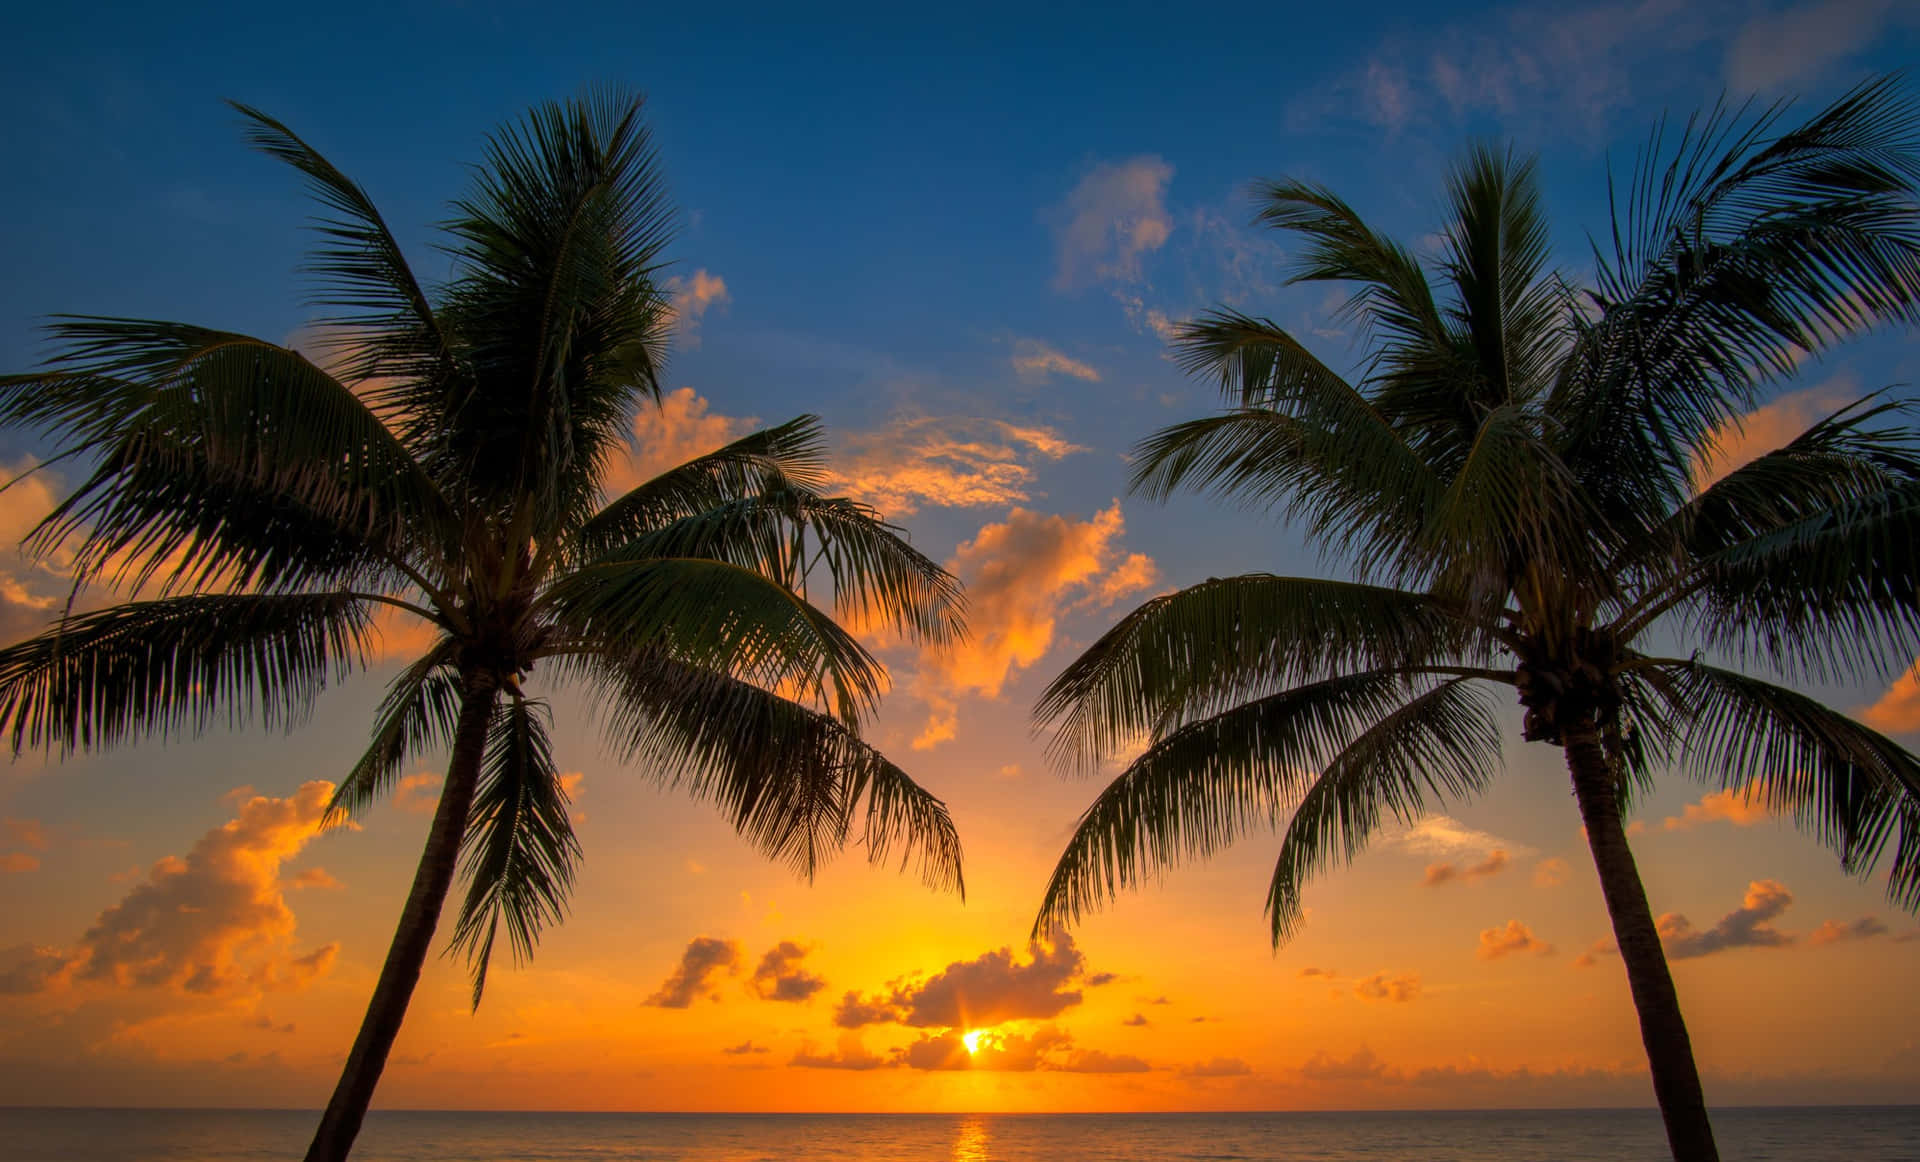 Caption: A Serene Tropical Paradise with Golden Sands and Towering Palm Trees Wallpaper